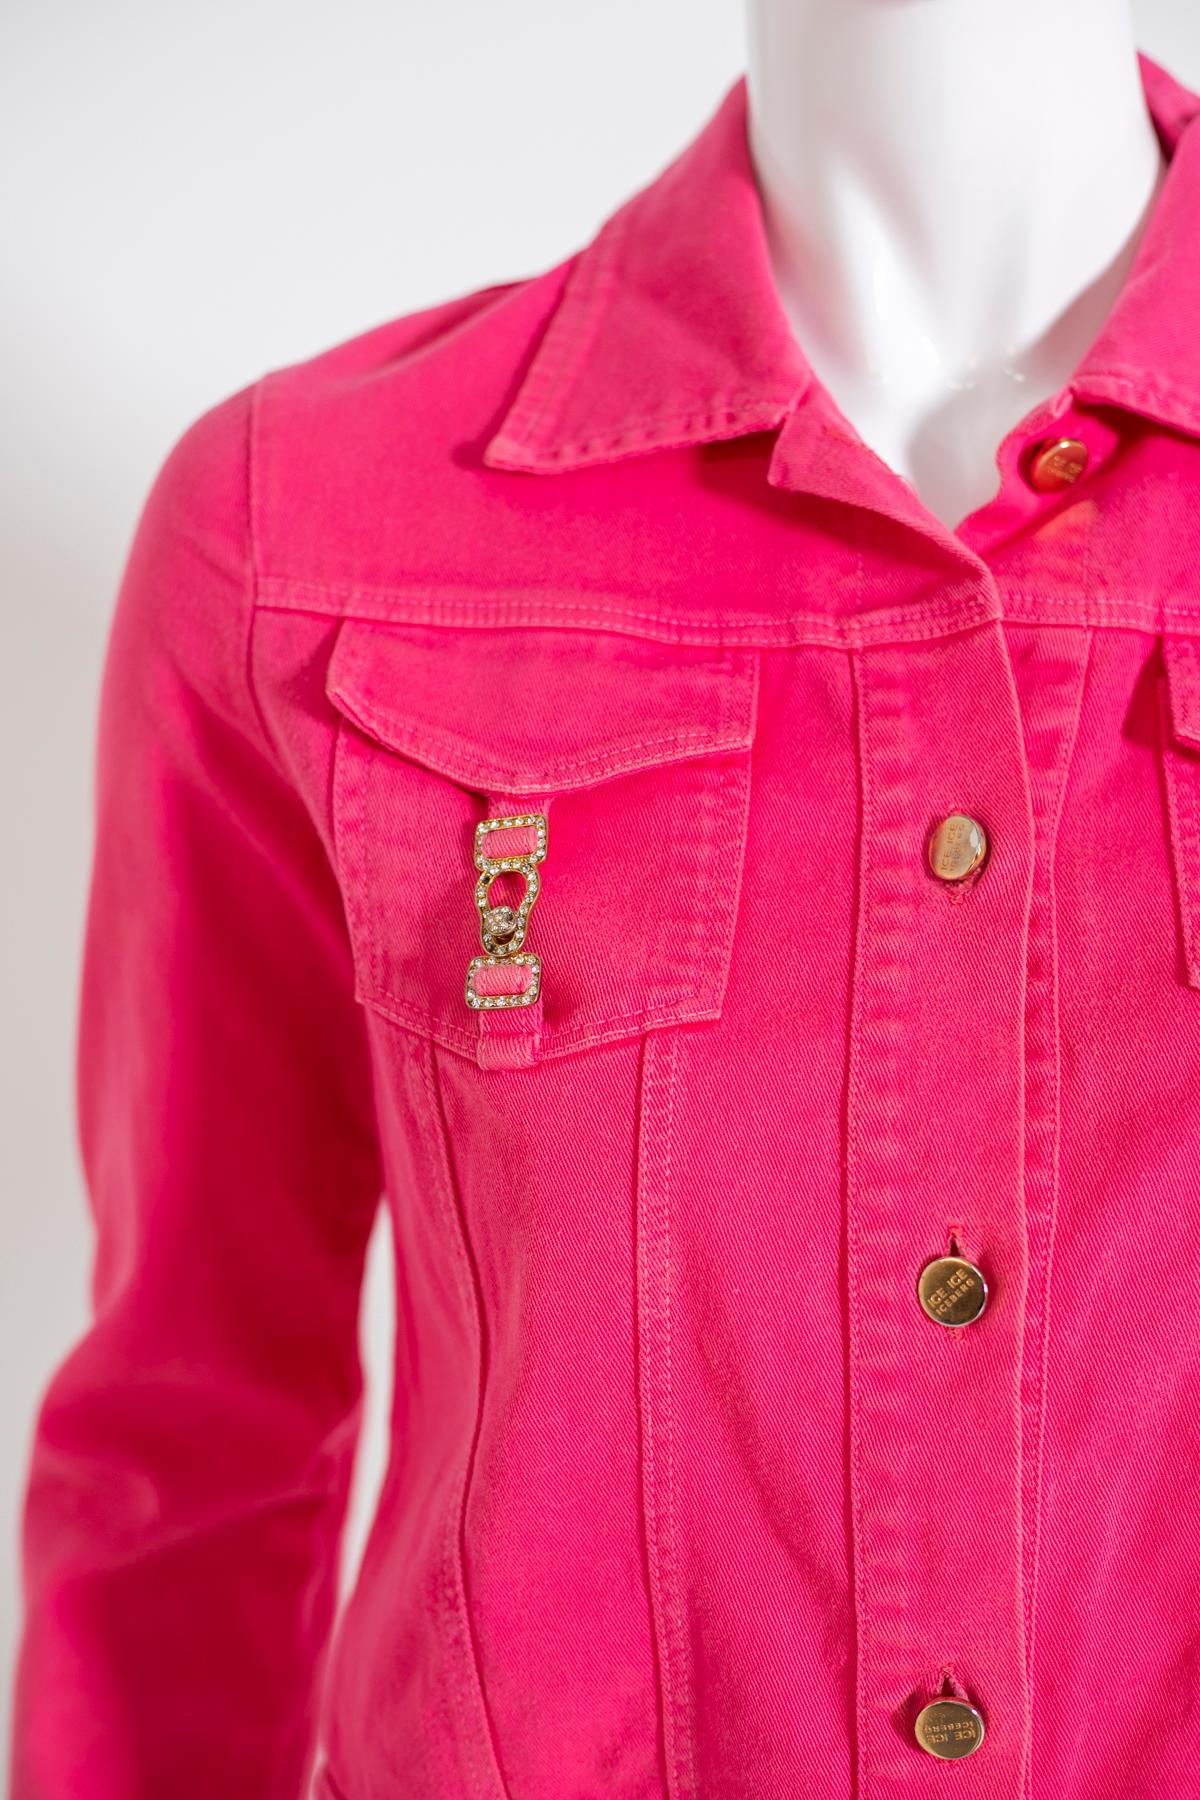 Eye-catching short fuchsia cotton jacket by Iceberg from the 1990s, made in Italy.
The jacket has a classic jean jacket cut, long thin sleeves and narrower cuffs.
The collar has a small stand-up collar and is connected to the main body by five gold